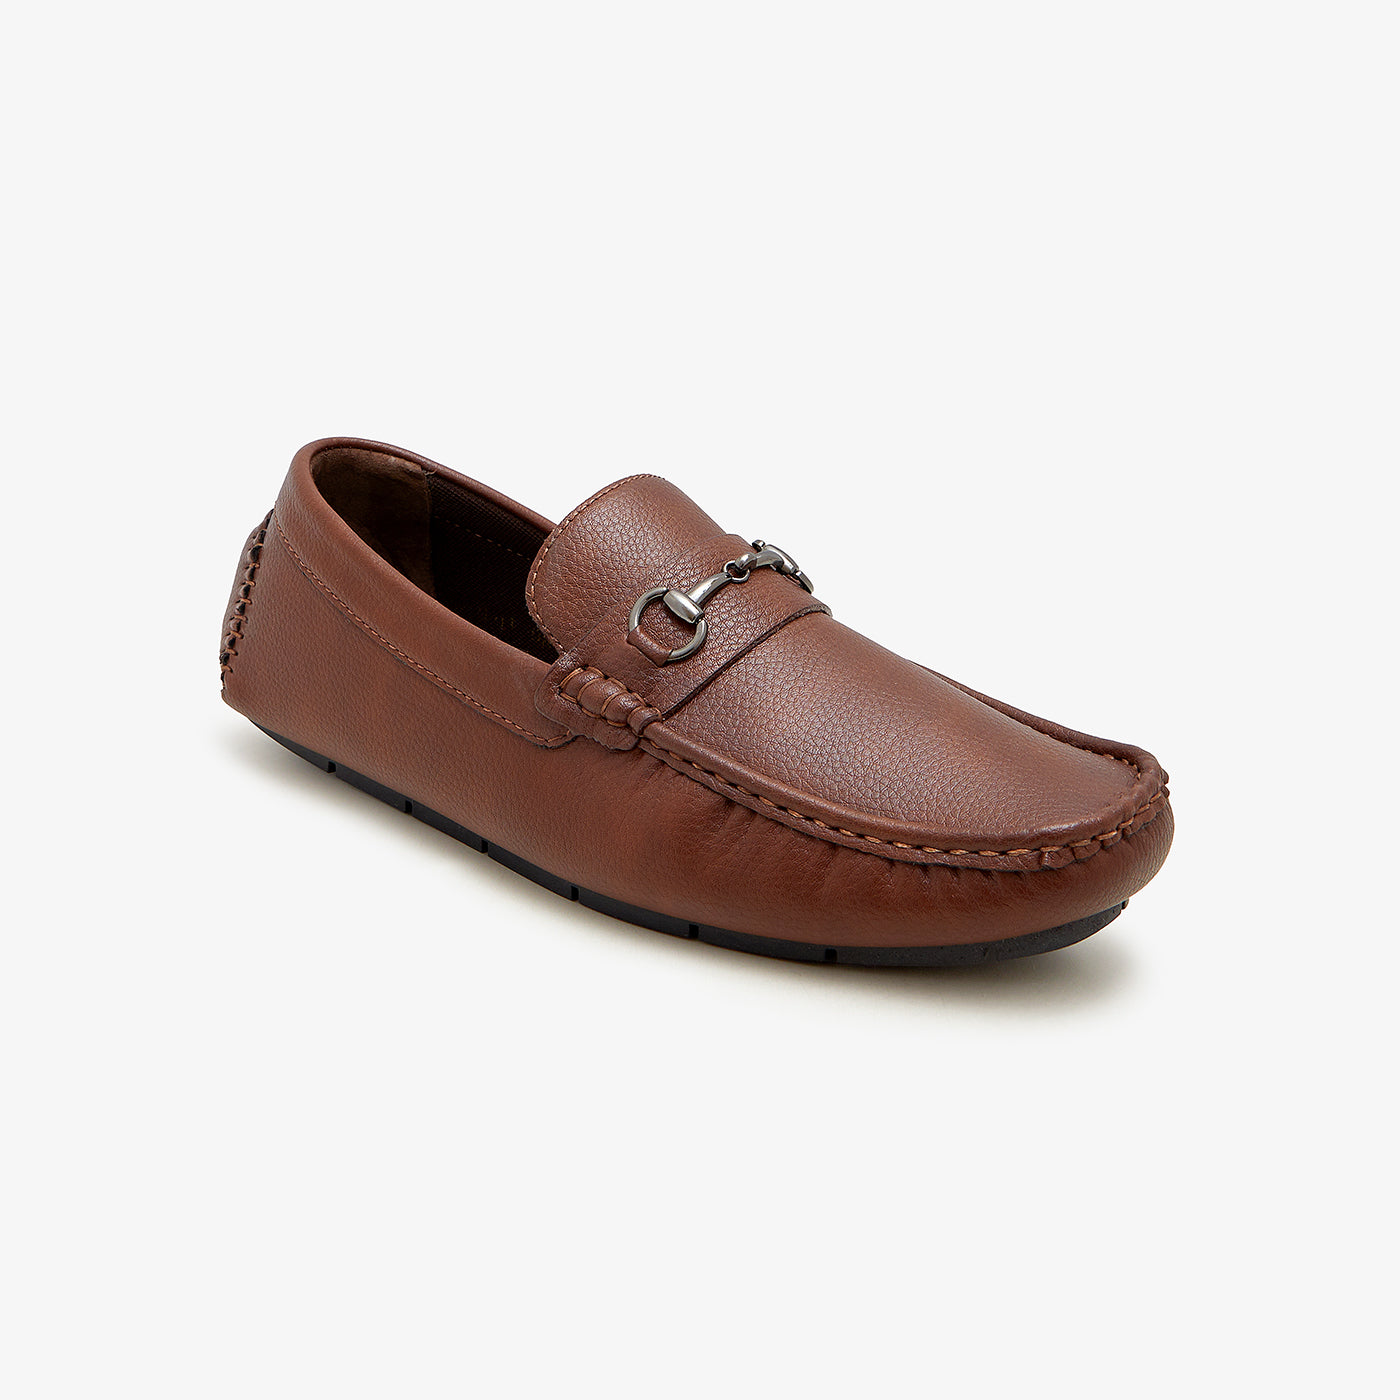 Men's Buckle Styled Loafers